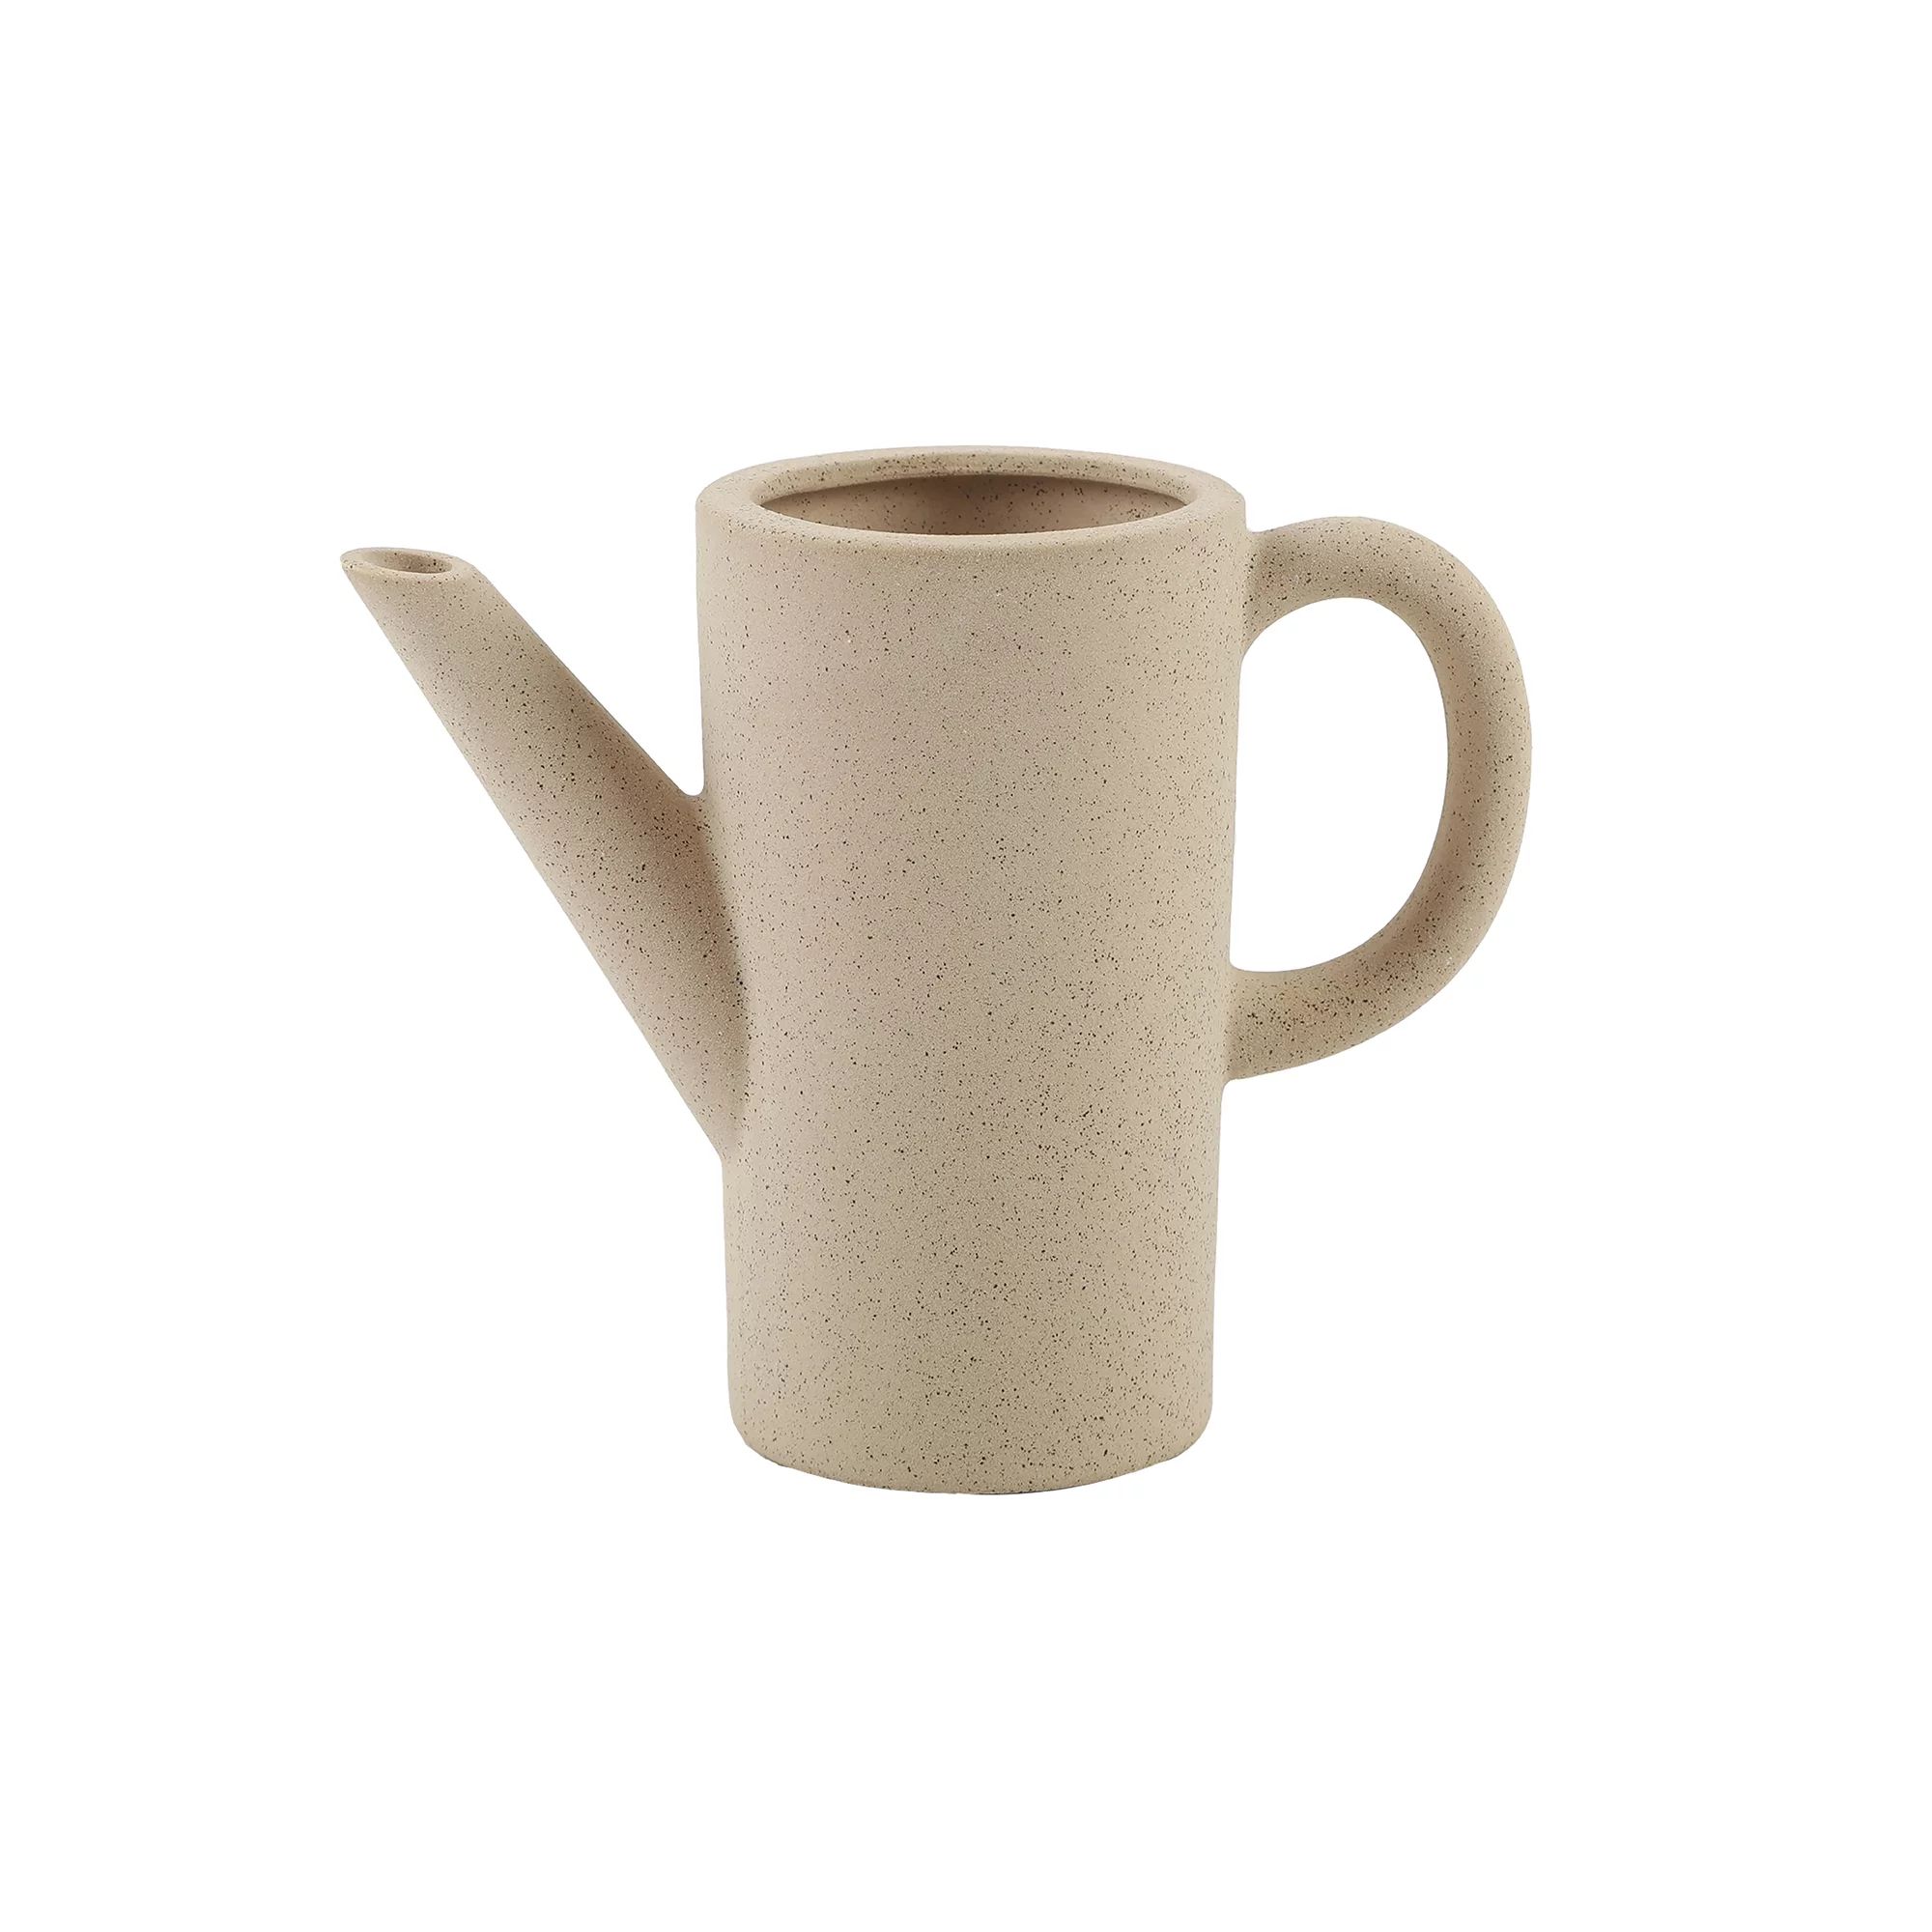 8.75 in. H Ceramic Watering Can,Speckle Natural | Walmart (US)